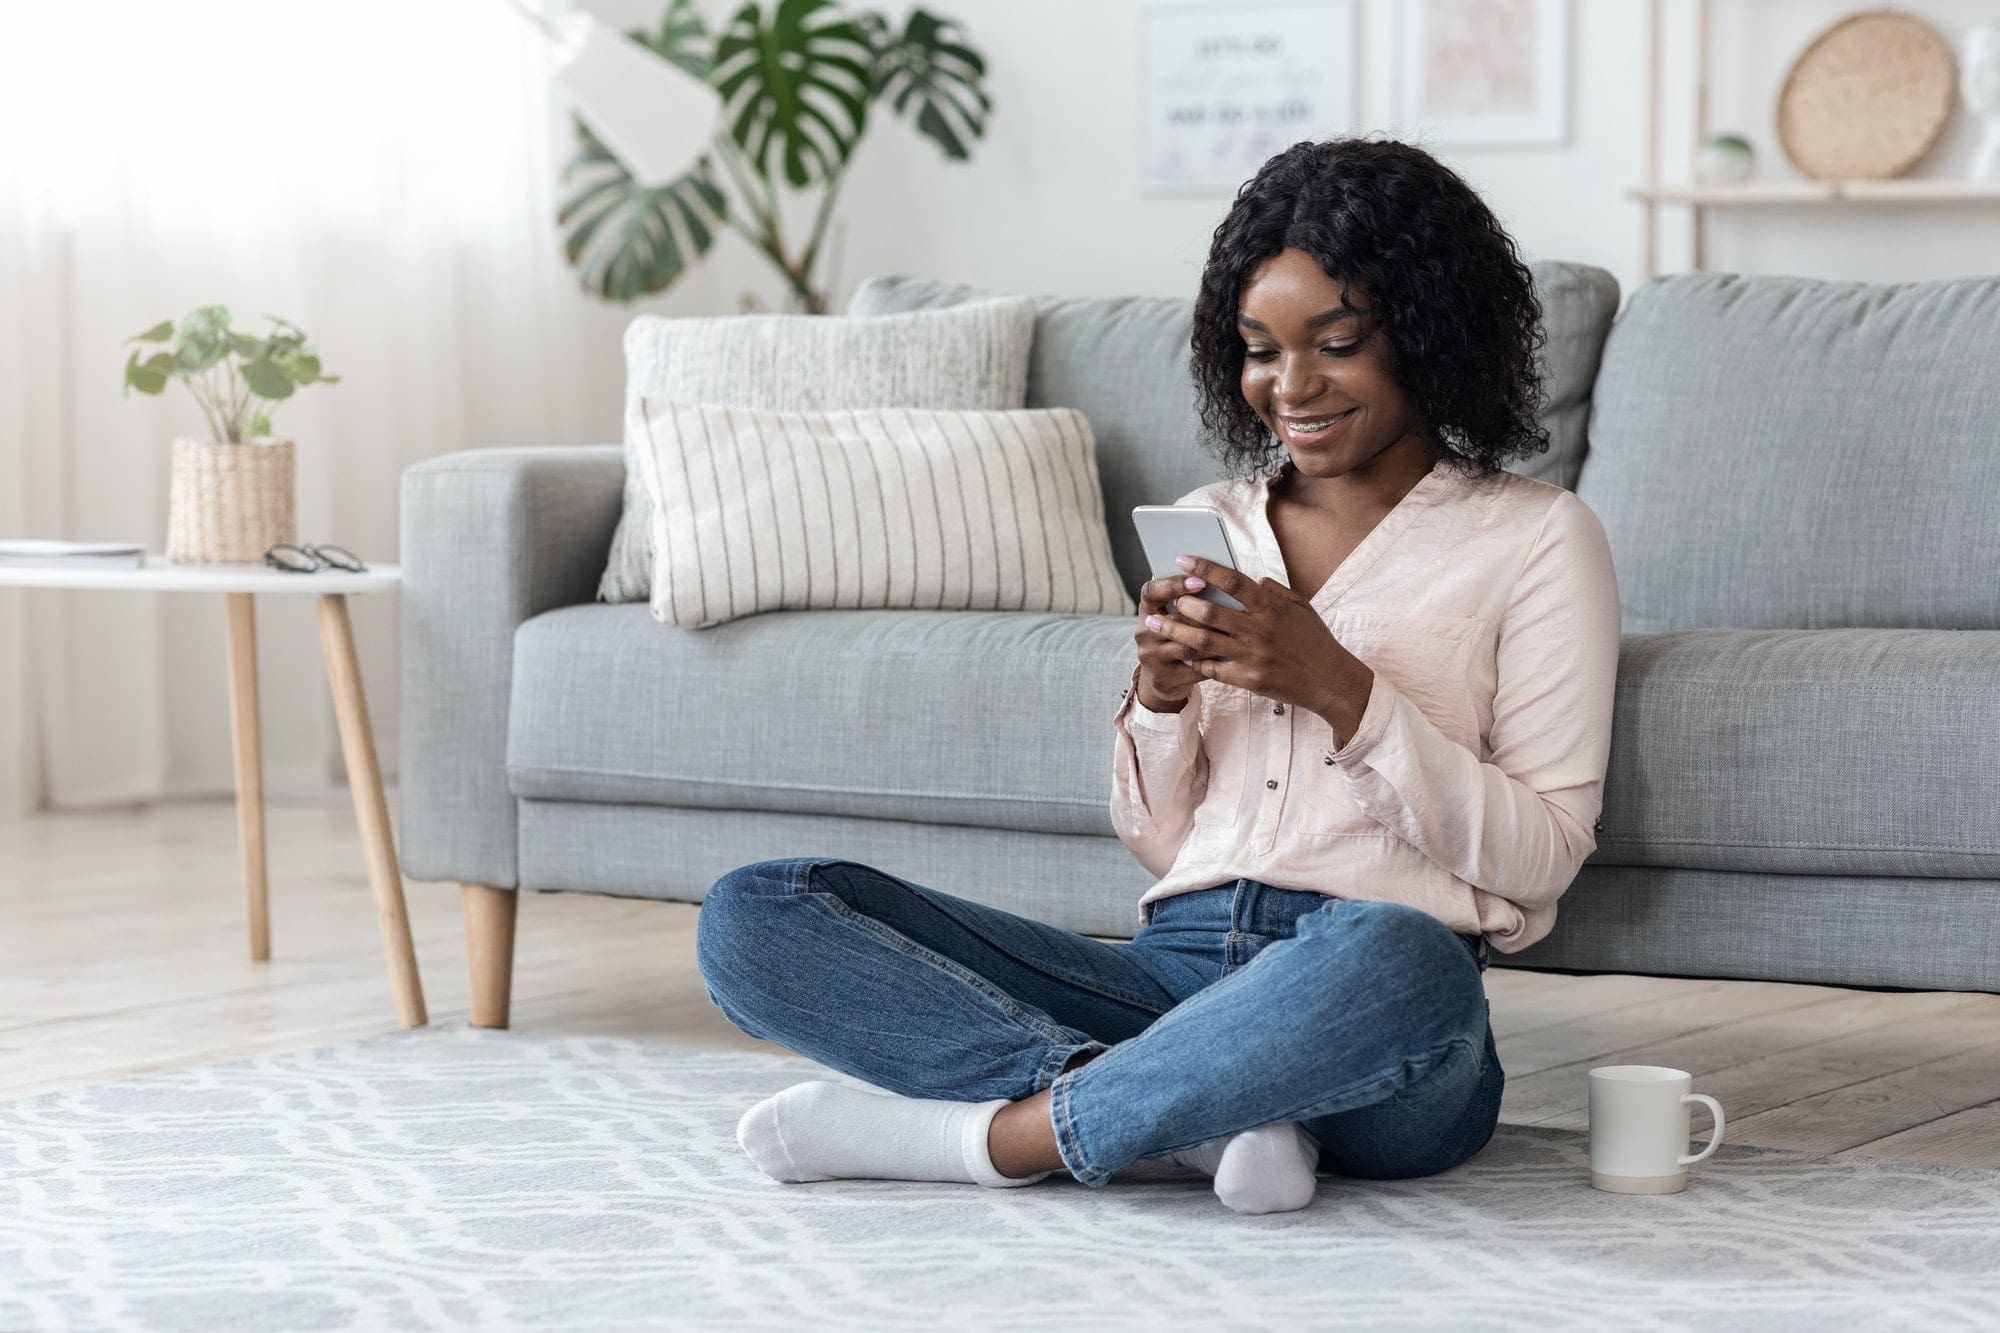 African Woman Browsing Social Media On Smartphone And Drinking Coffee At Home